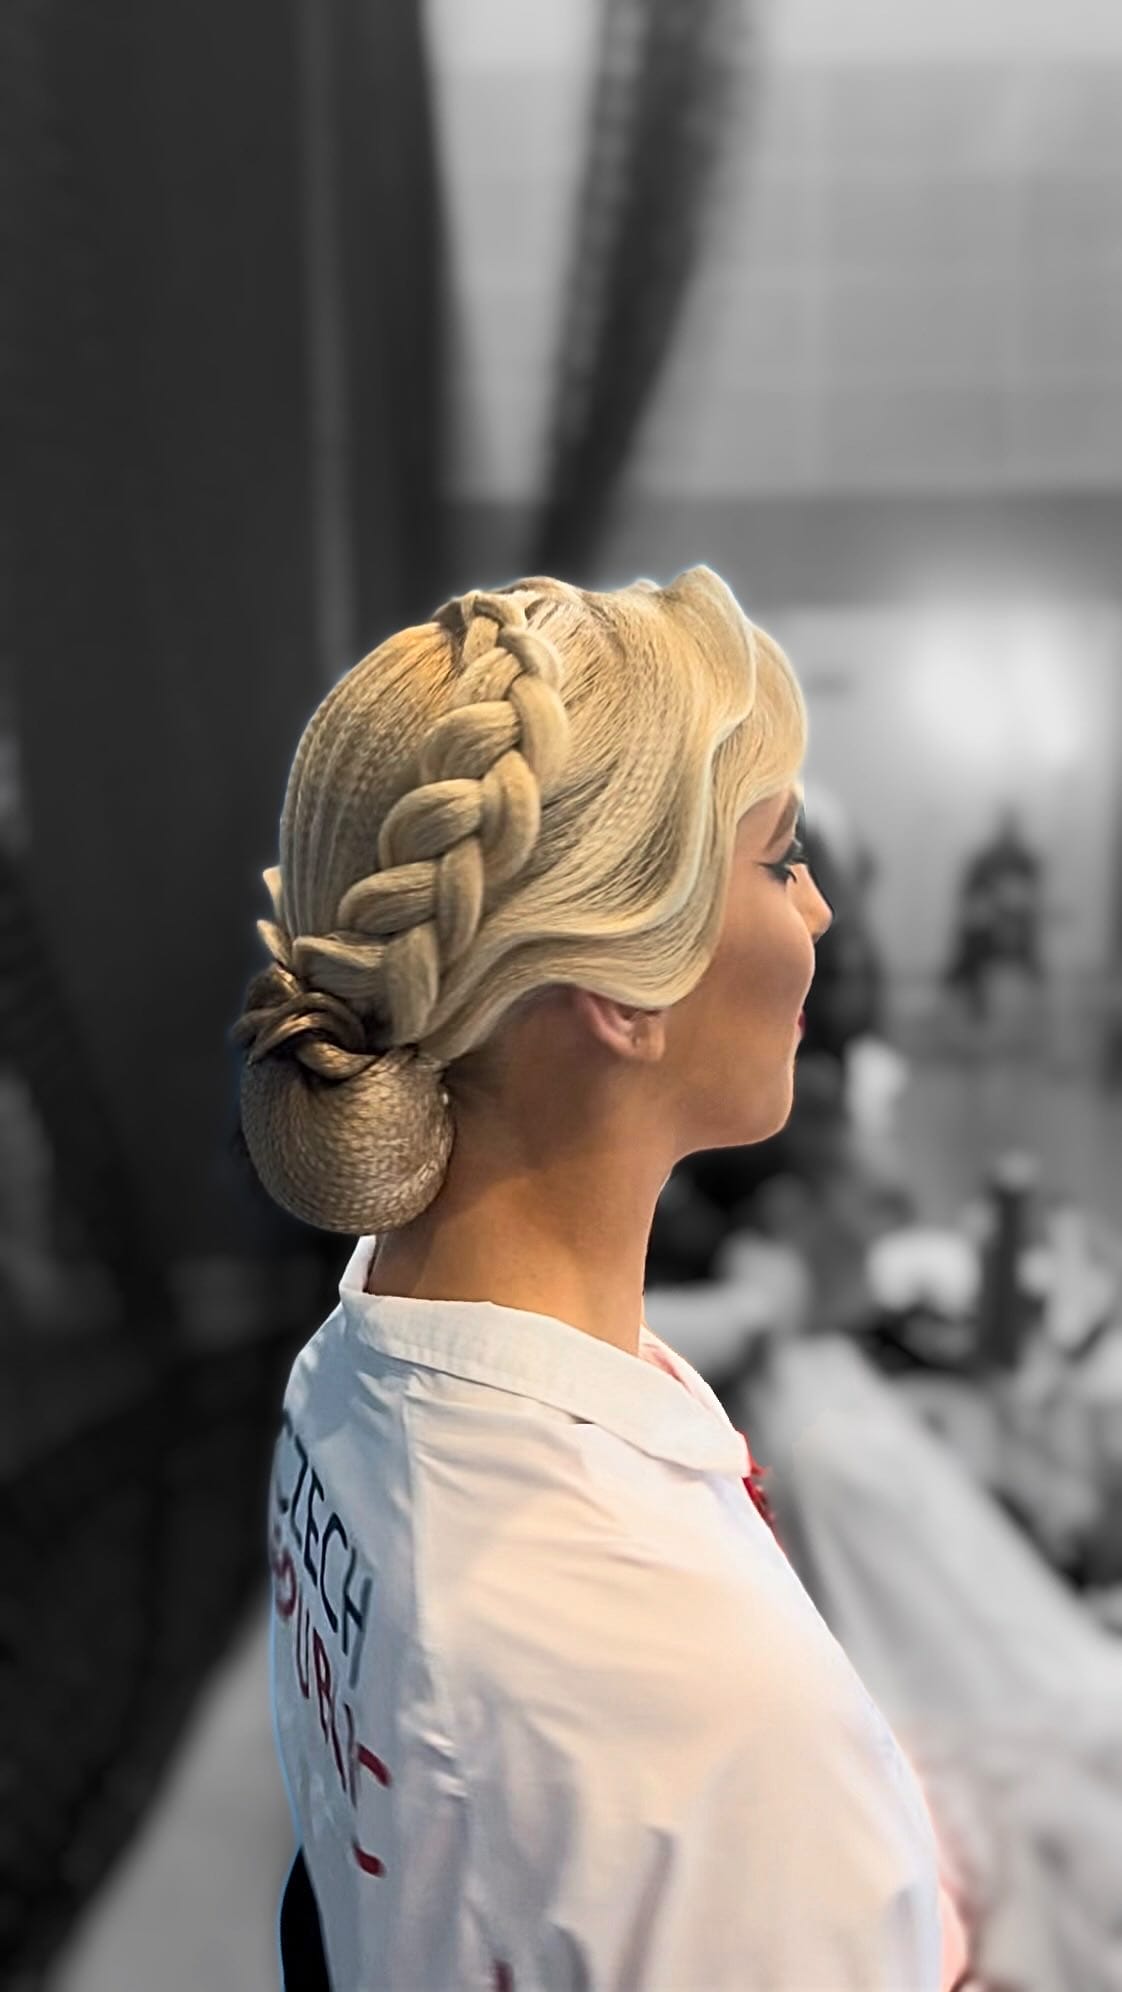 Blonde braid crowning into a tidy bun for dance precision